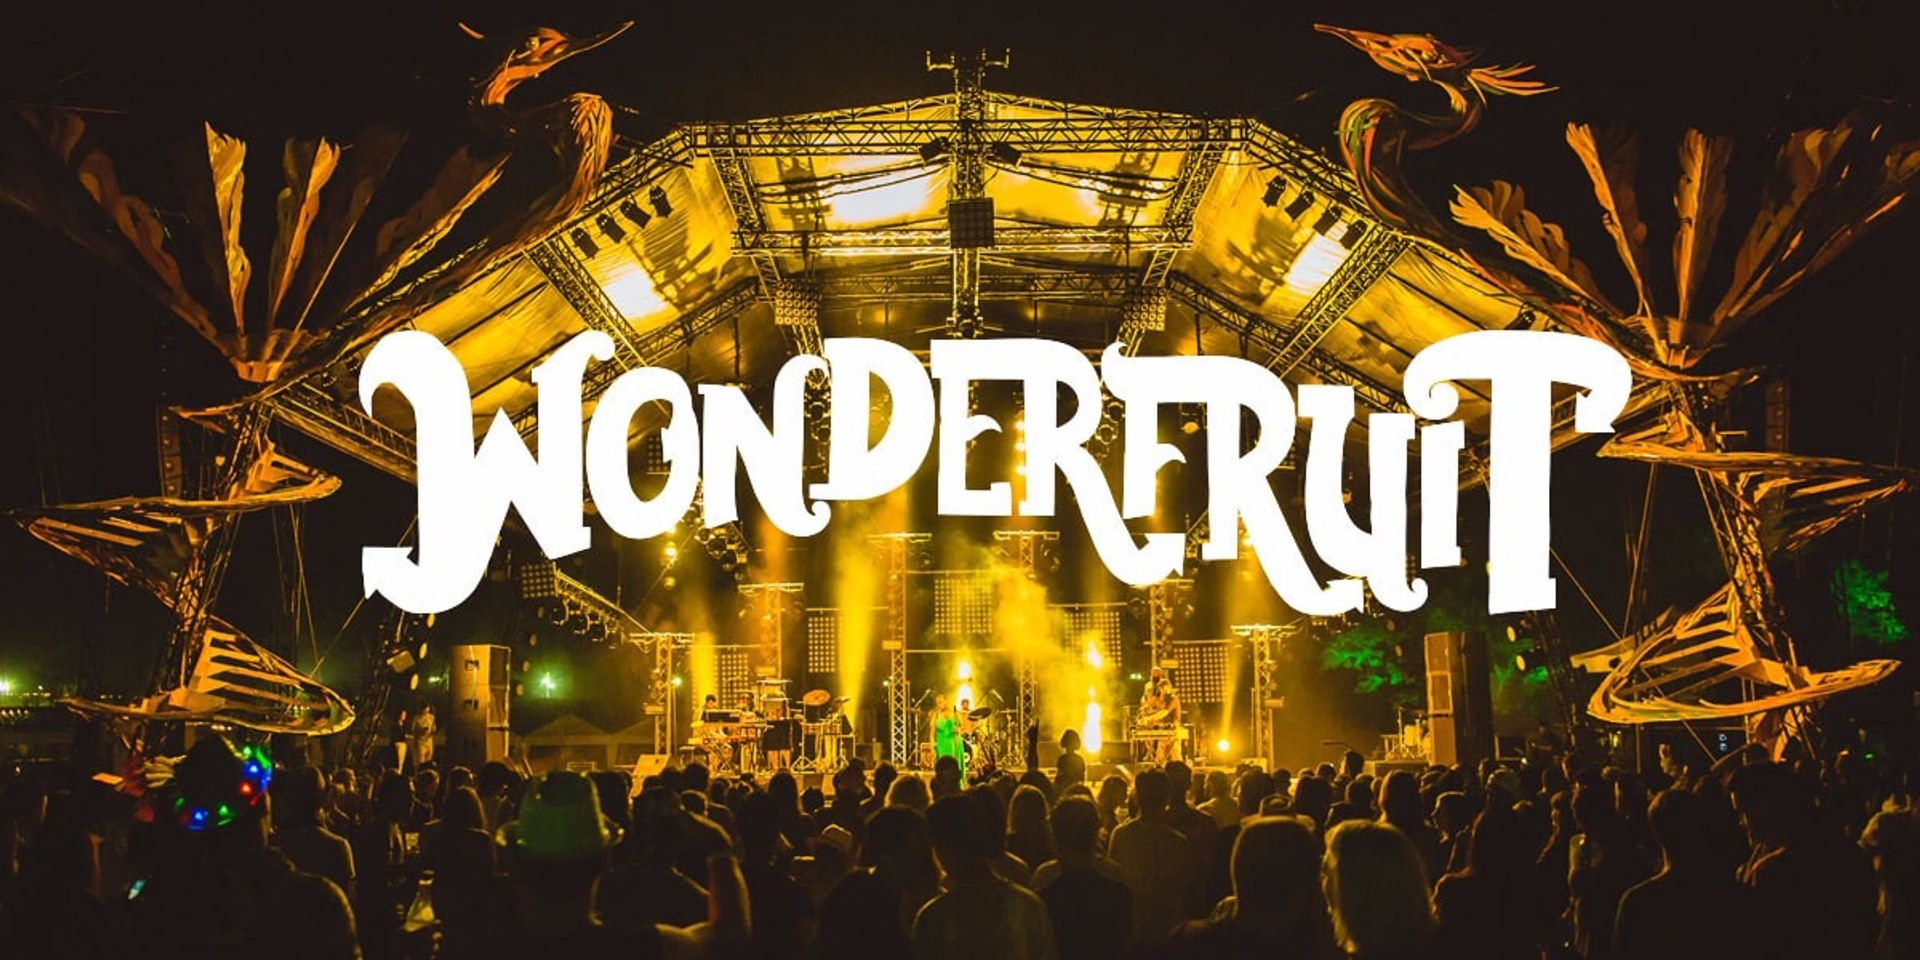 The five acts you can't miss at Wonderfruit, according to Gig Life Asia's Priya Dewan